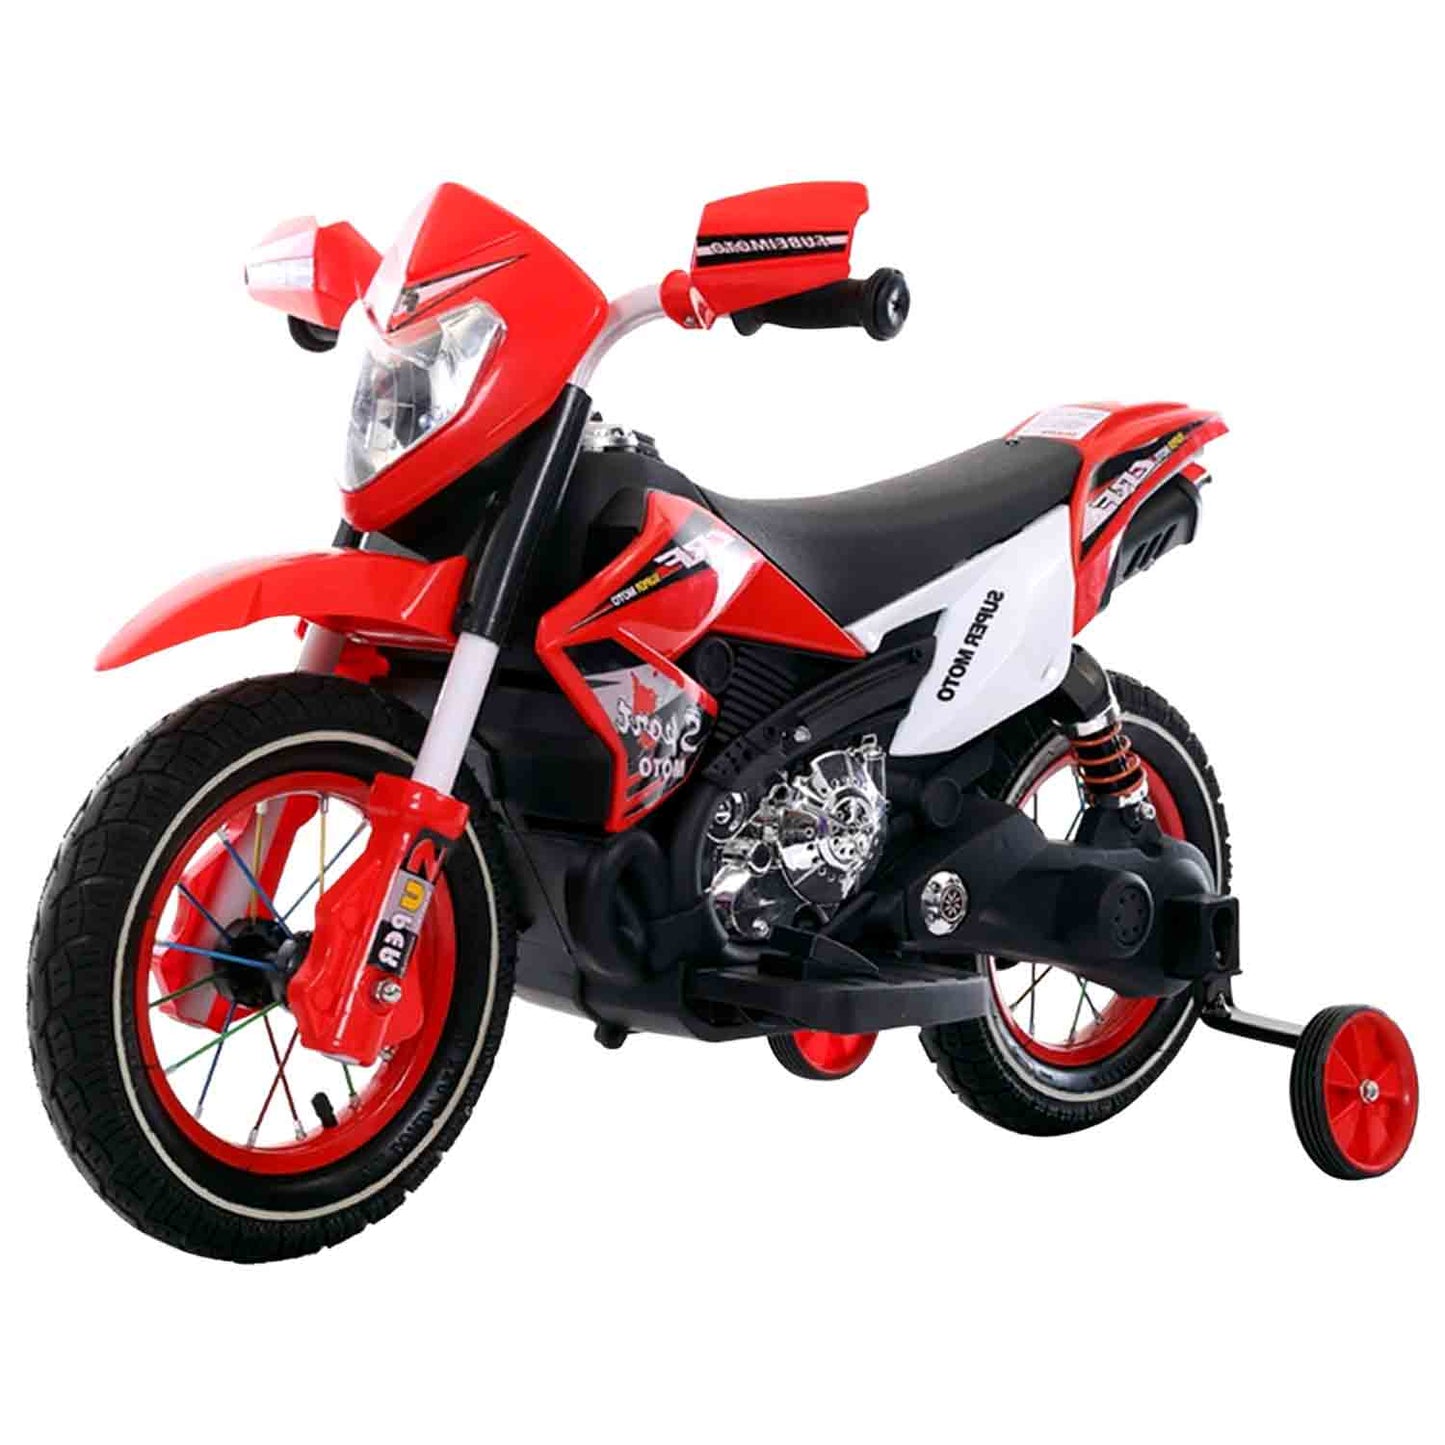 Fubei Sport Moto(Without Packing)